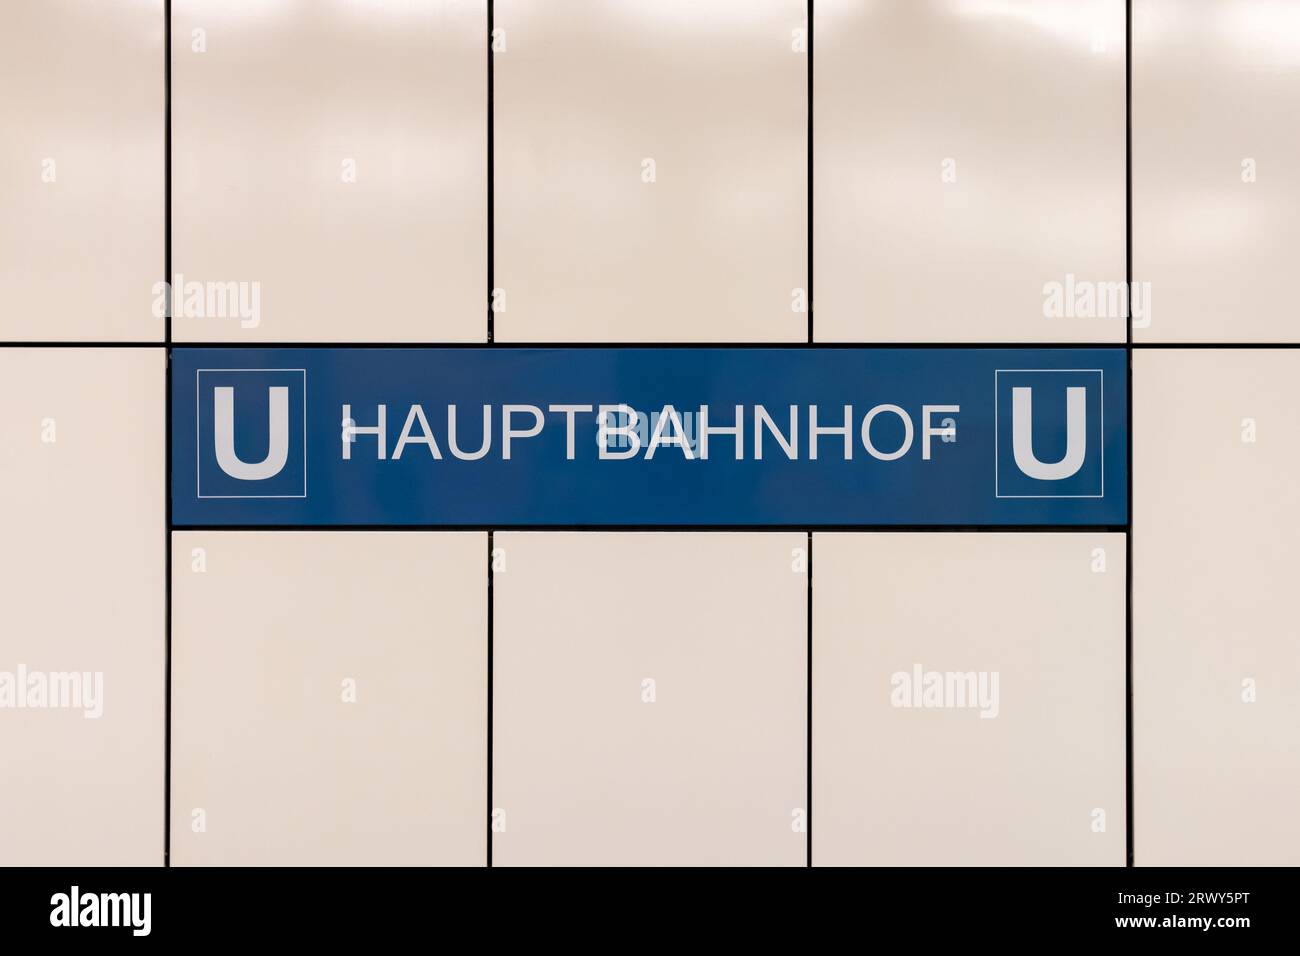 Hauptbahnhof (main station) sign of the U-Bahn (underground) in Berlin, Germany. Location name on the tiled wall for the public transportation. Stock Photo